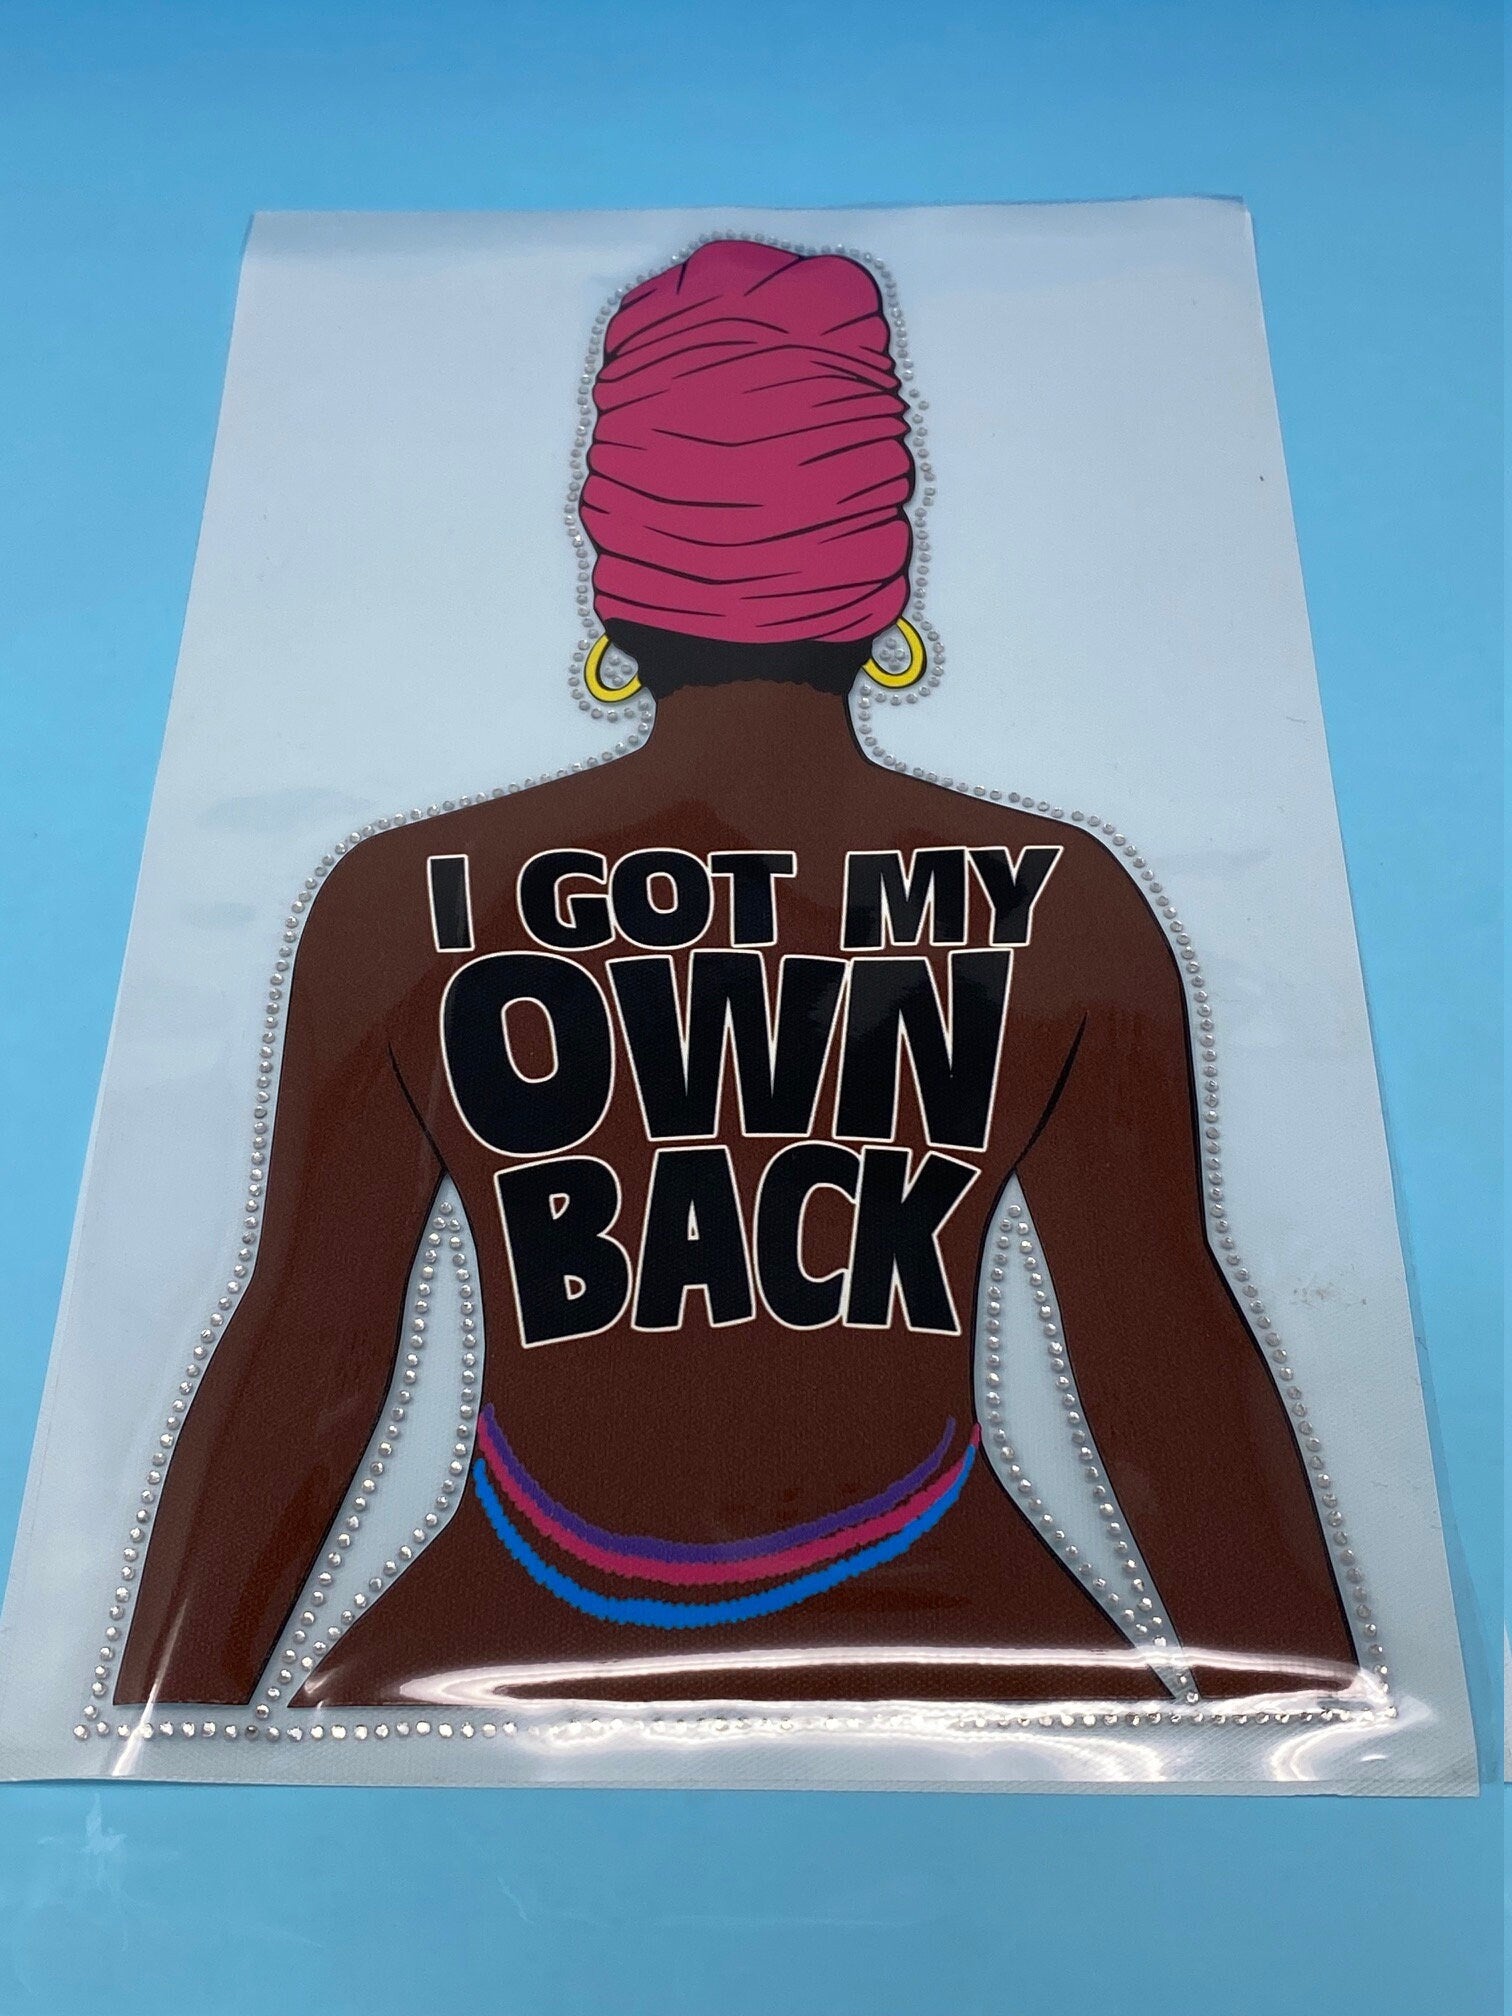 T-shirt Transfer Sheet, "I Got My Own Back!" outlined in blinging crystals for HEAT PRESSING on garments, Htv Appliques,